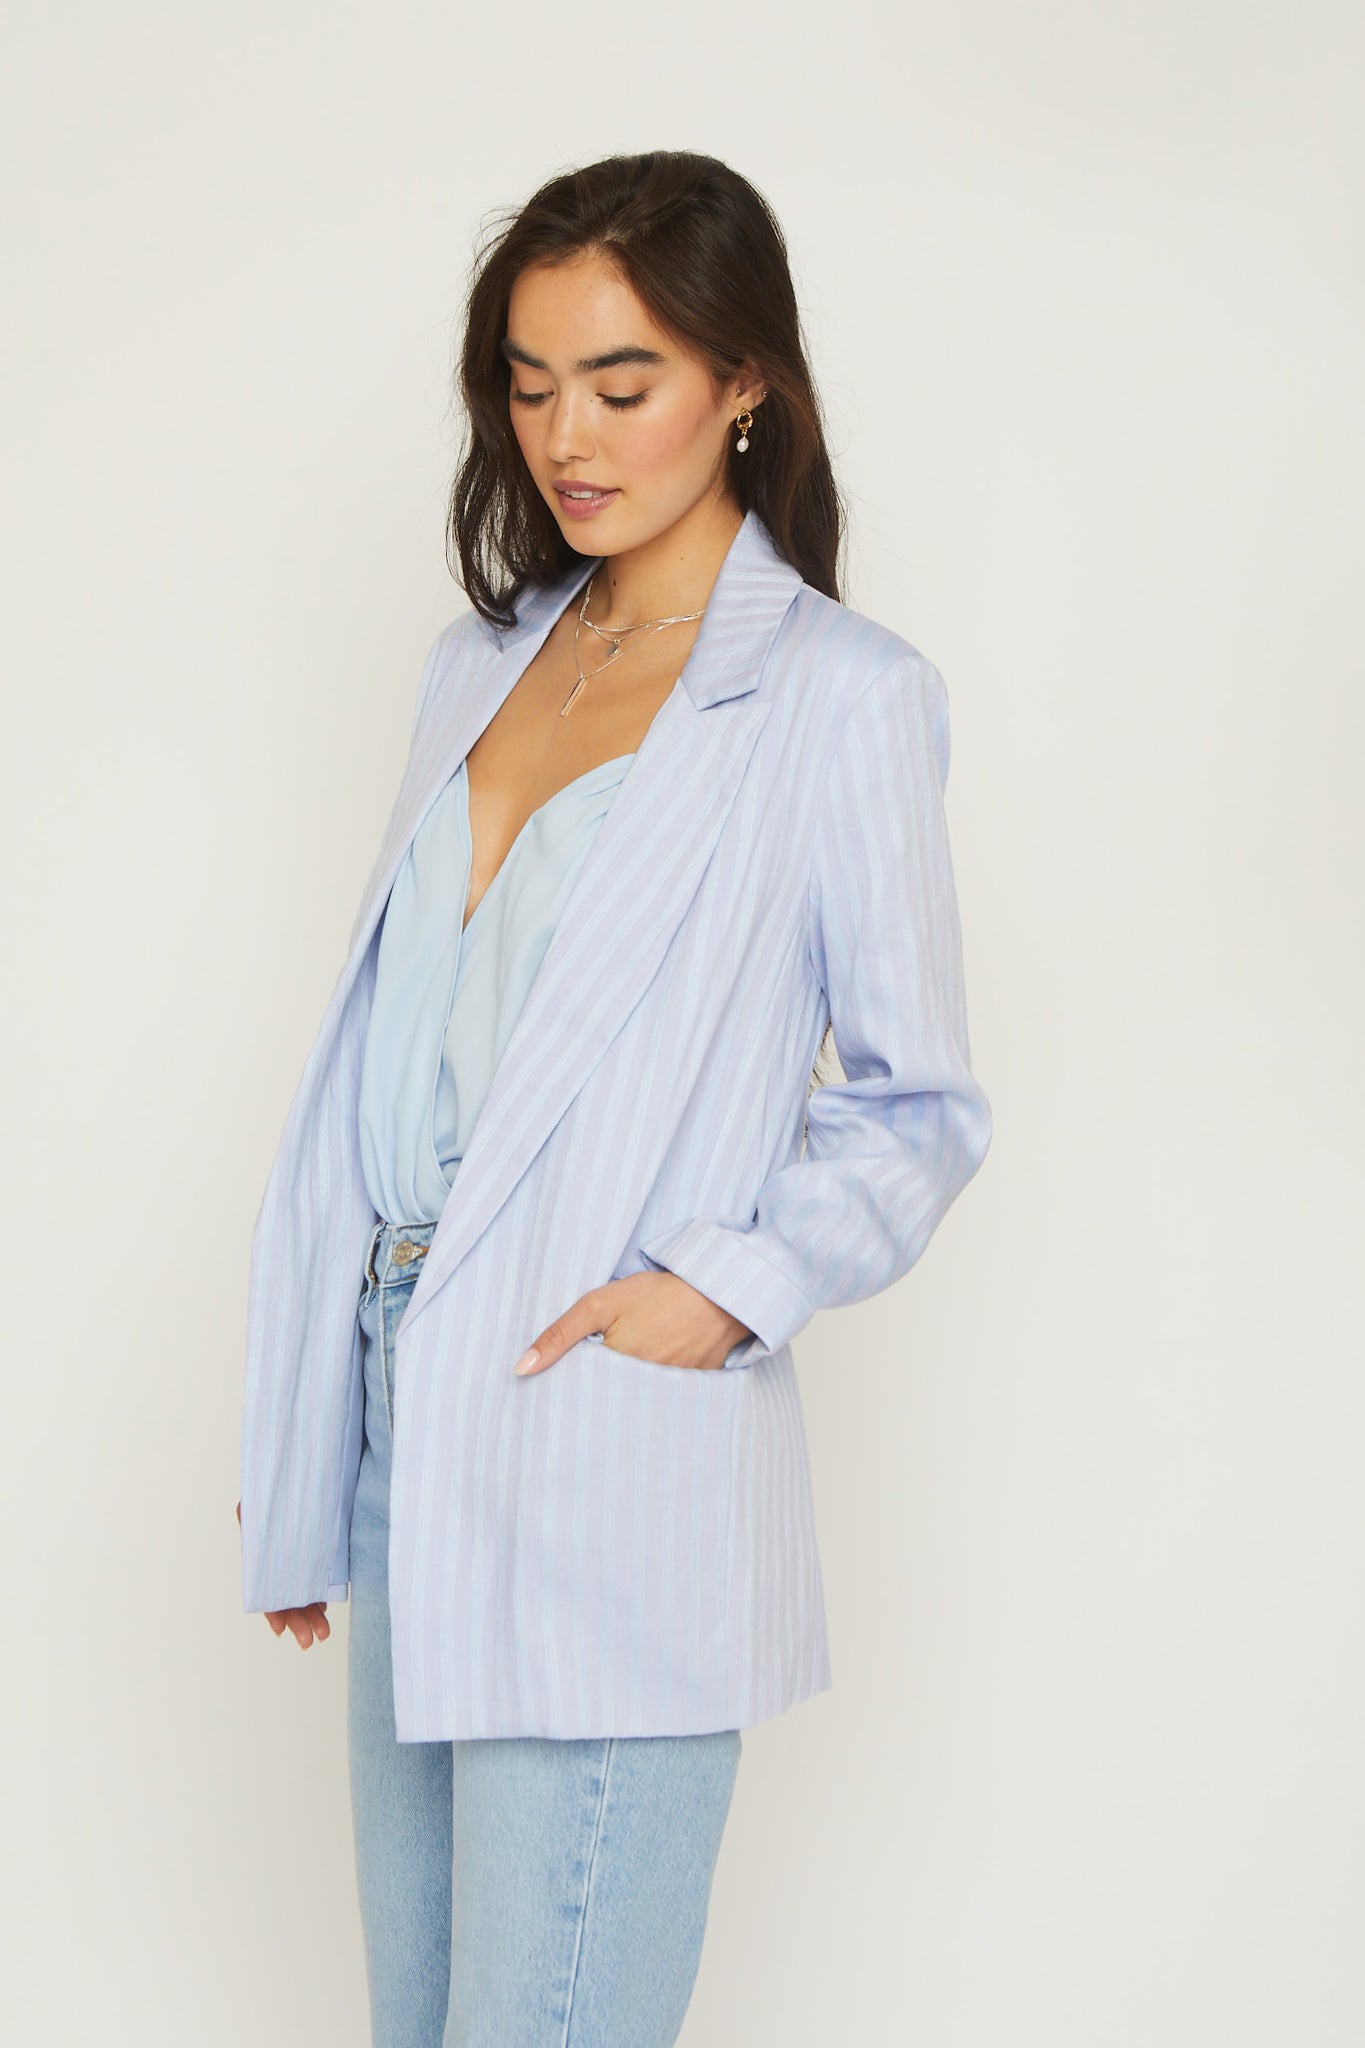 Madison jacket, oversized fit, linen blend , lustrous, sheen fabric, front pocket, open front, cuffed sleeve, light blue color